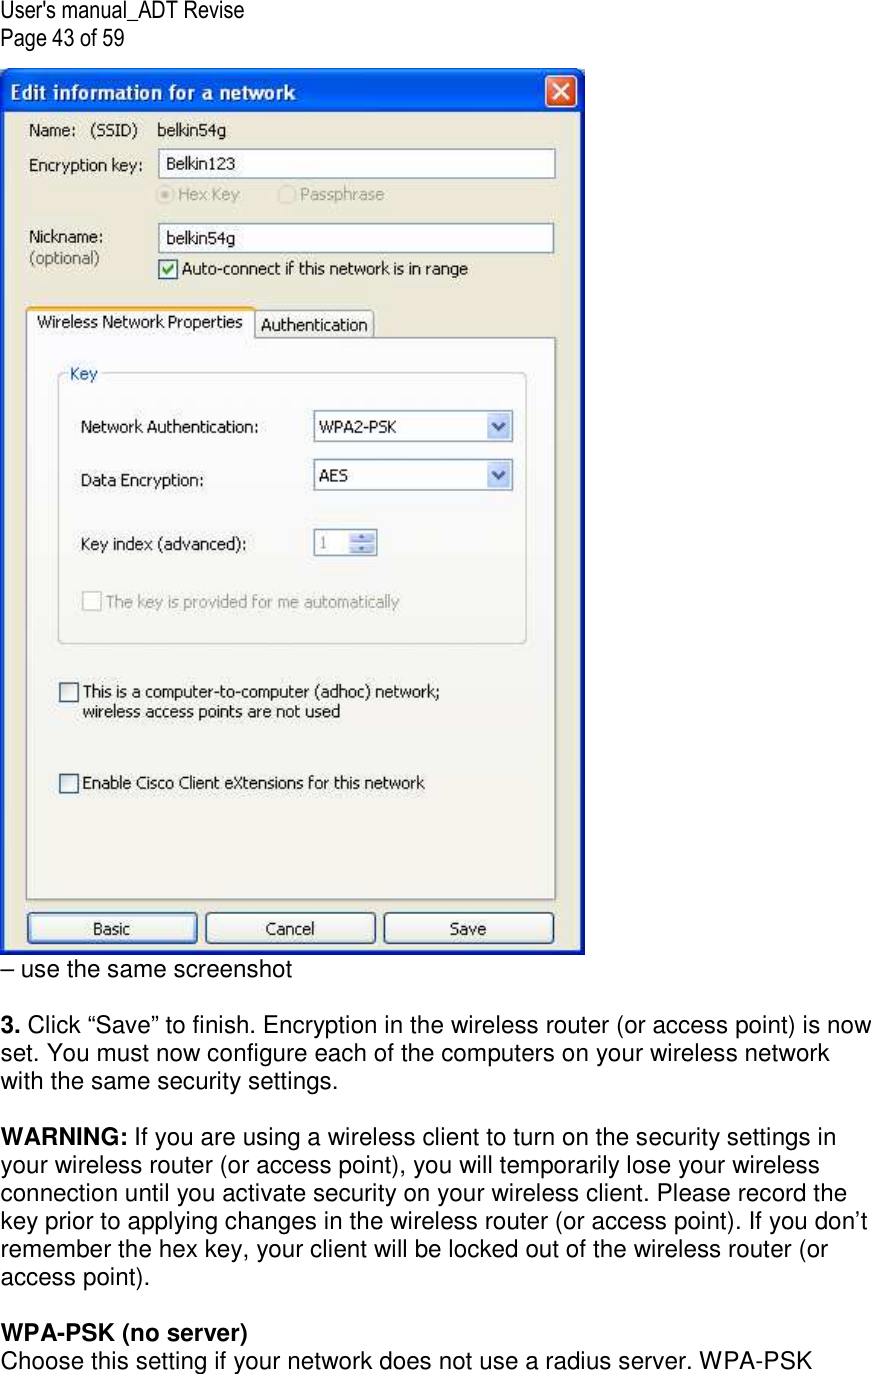 User&apos;s manual_ADT Revise Page 43 of 59  – use the same screenshot  3. Click “Save” to finish. Encryption in the wireless router (or access point) is now set. You must now configure each of the computers on your wireless network with the same security settings.  WARNING: If you are using a wireless client to turn on the security settings in your wireless router (or access point), you will temporarily lose your wireless connection until you activate security on your wireless client. Please record the key prior to applying changes in the wireless router (or access point). If you don’t remember the hex key, your client will be locked out of the wireless router (or access point).  WPA-PSK (no server) Choose this setting if your network does not use a radius server. WPA-PSK 